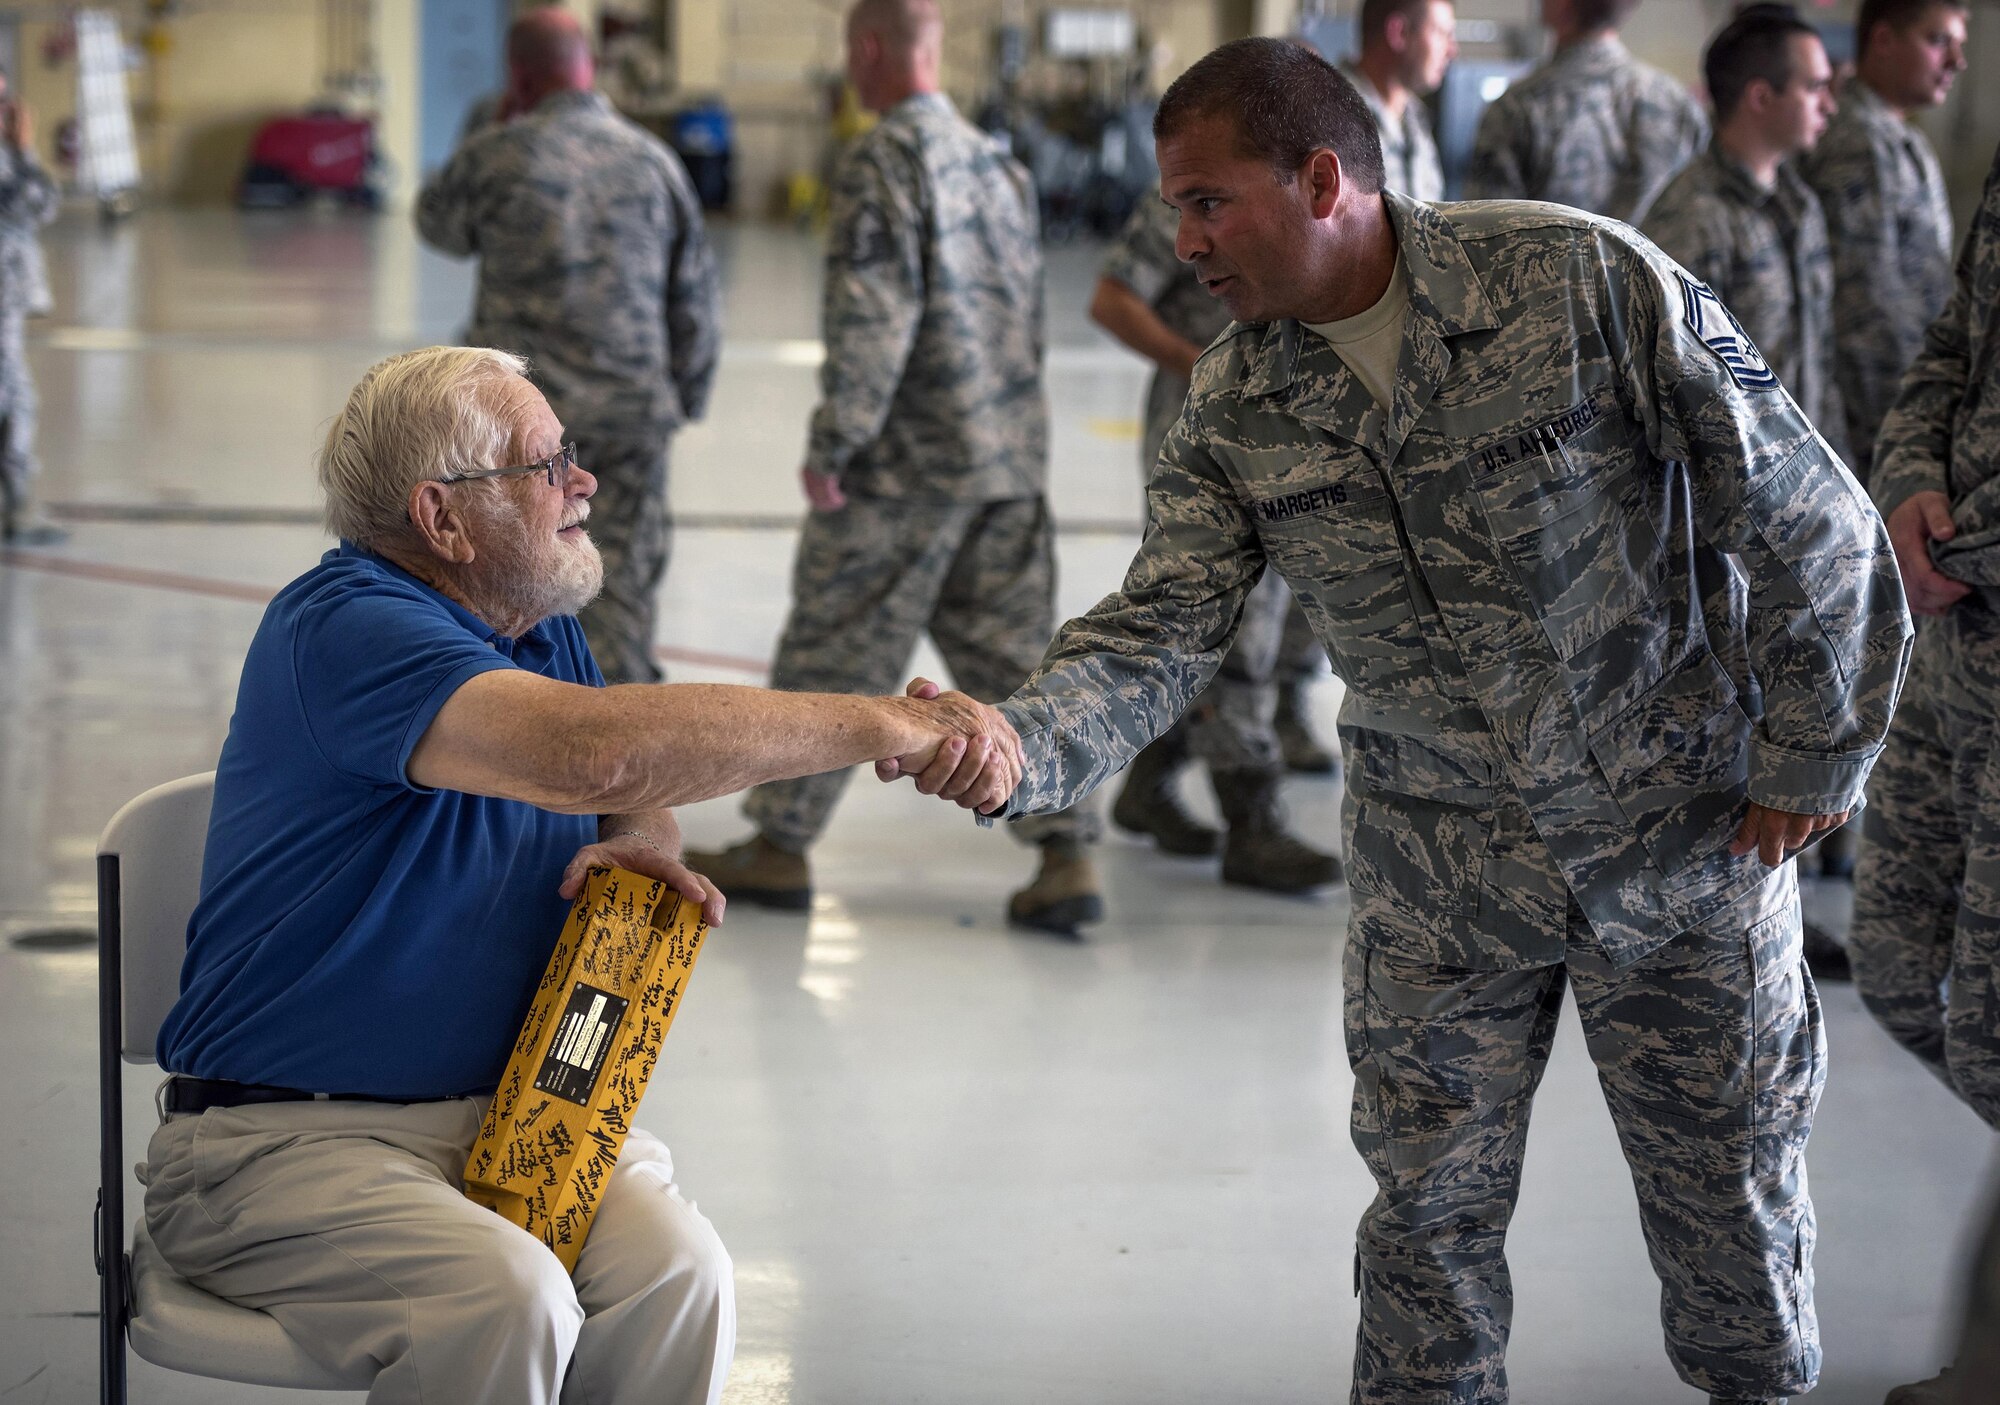 Retired U.S. Air Force Chief Master Sgt. Homer Wells, a former chief of maintenance with the 182nd Tactical Air Support Group, shakes the hand of Senior Master Sgt. Scott Margetis, an aerospace maintenance master with the 182nd Maintenance Squadron, during a ceremony honoring his service in Peoria, Ill., Aug. 24, 2017. Wells enlisted in 1947 and retired in 1984 with 37 years of service with the Illinois Air National Guard. (U.S. Air National Guard photo by Tech. Sgt. Lealan Buehrer)